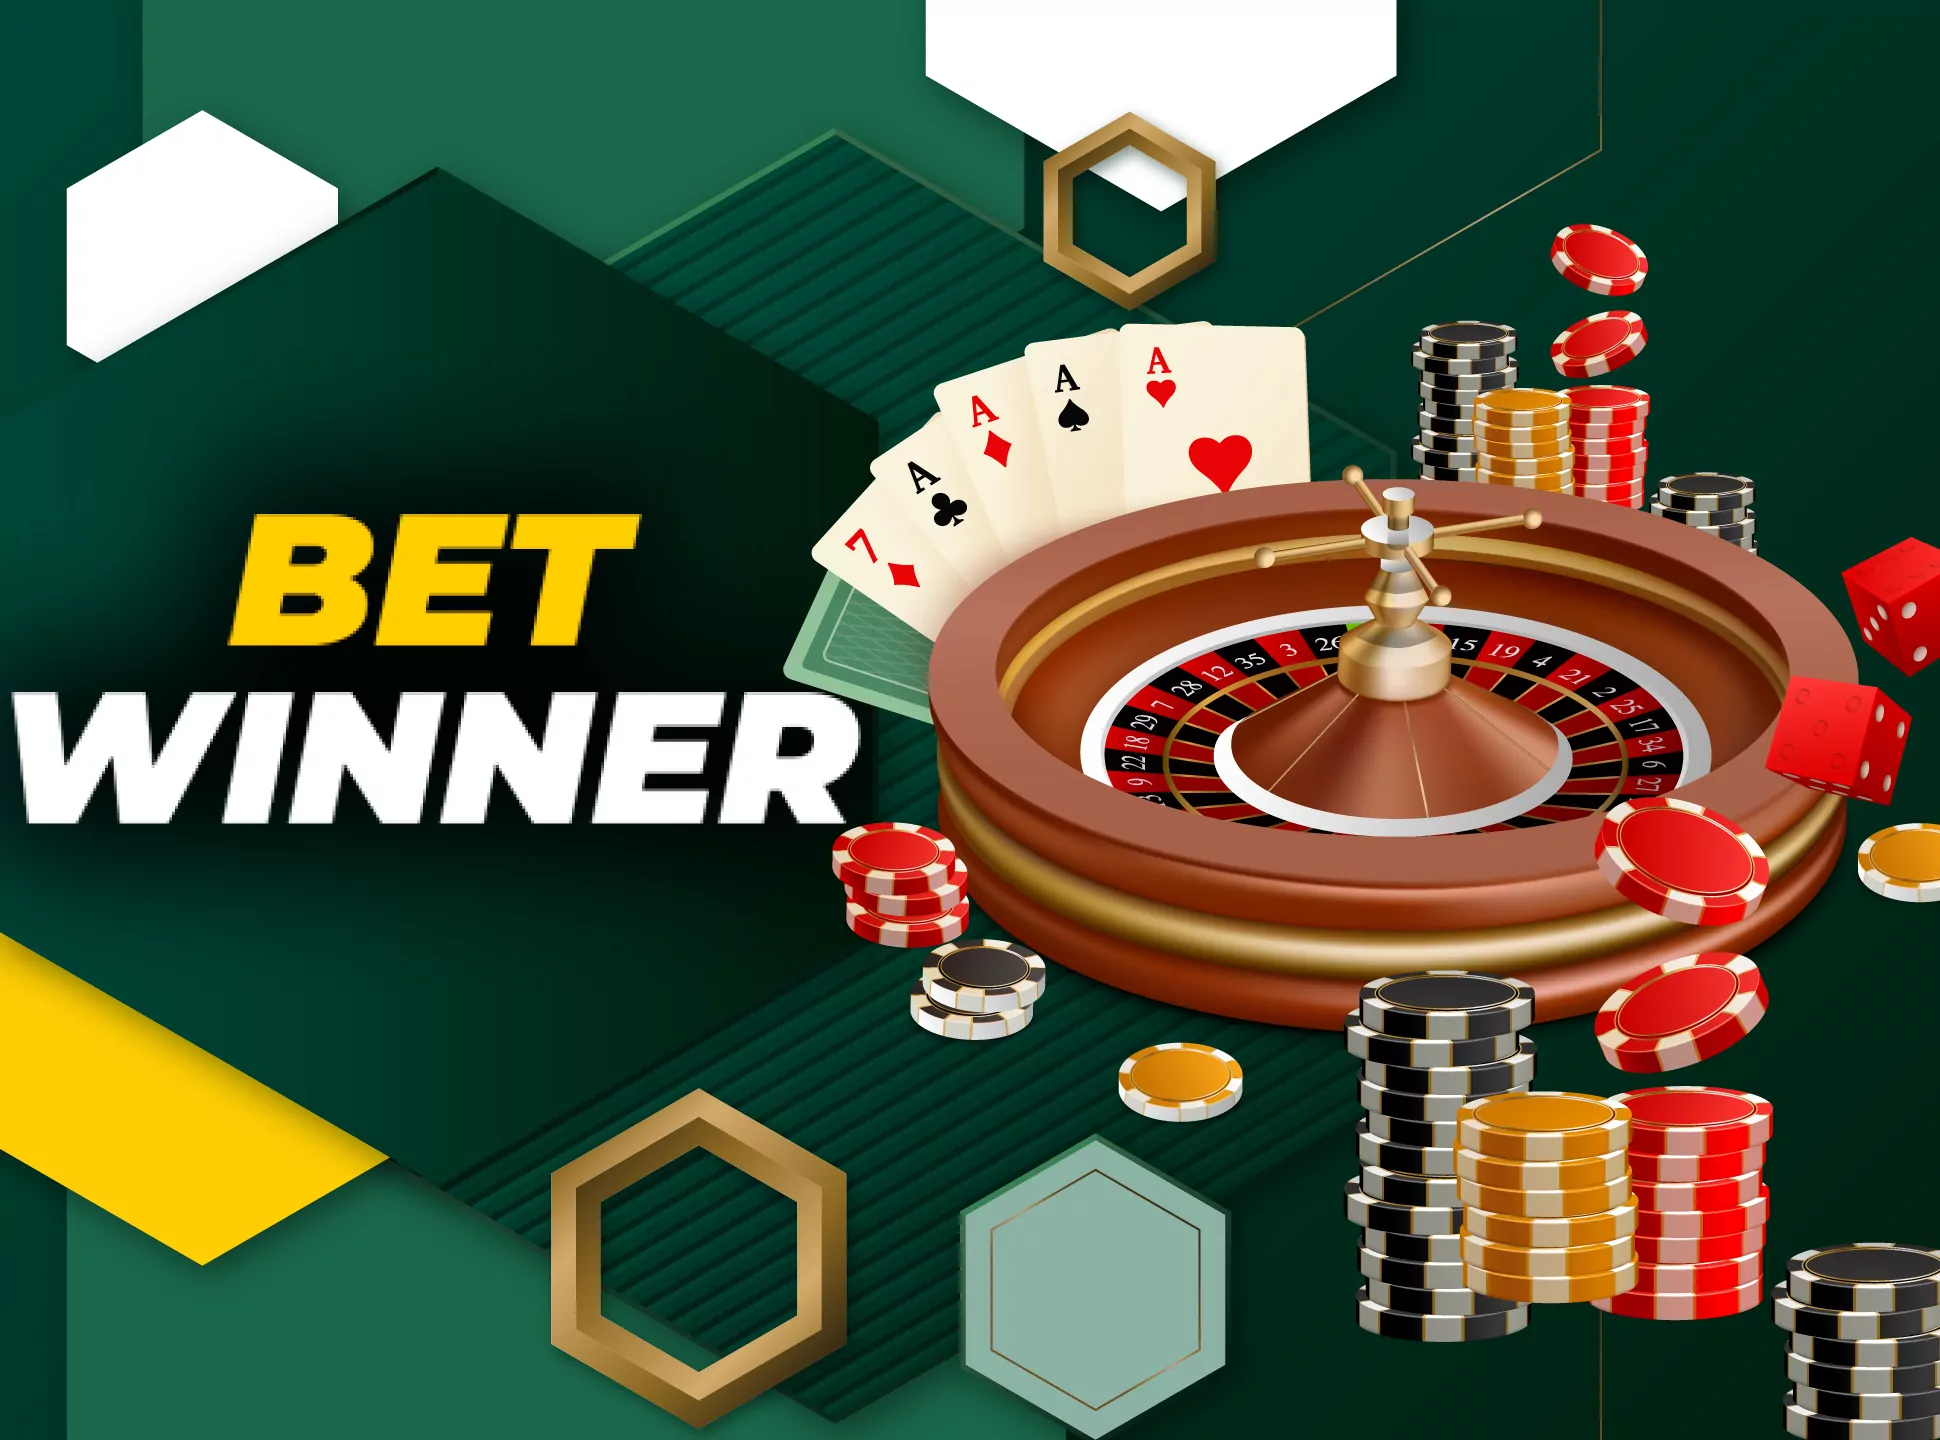 Roullete games can be played against the real dealrs at Betwinner.